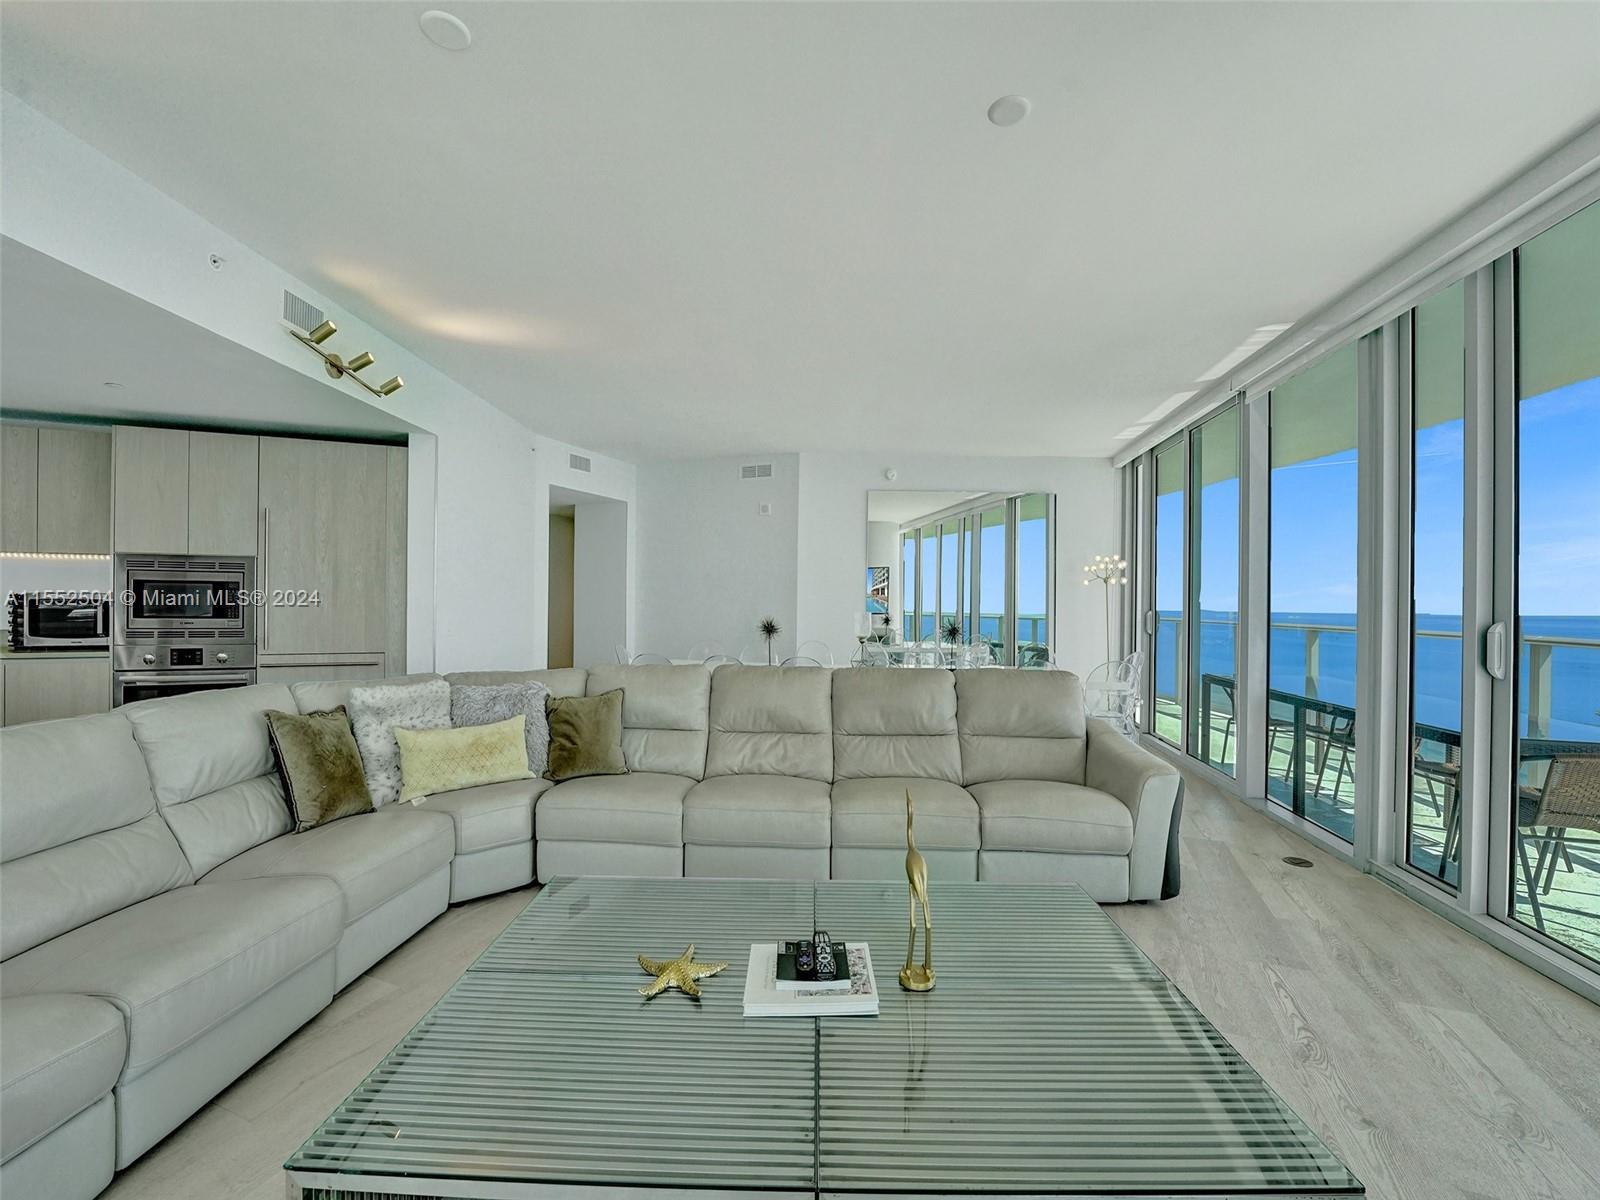 ONE OF KIND OCEANFRONT RESIDENCE at Hyde Resort & Residences with breathtaking views to enjoy sunris